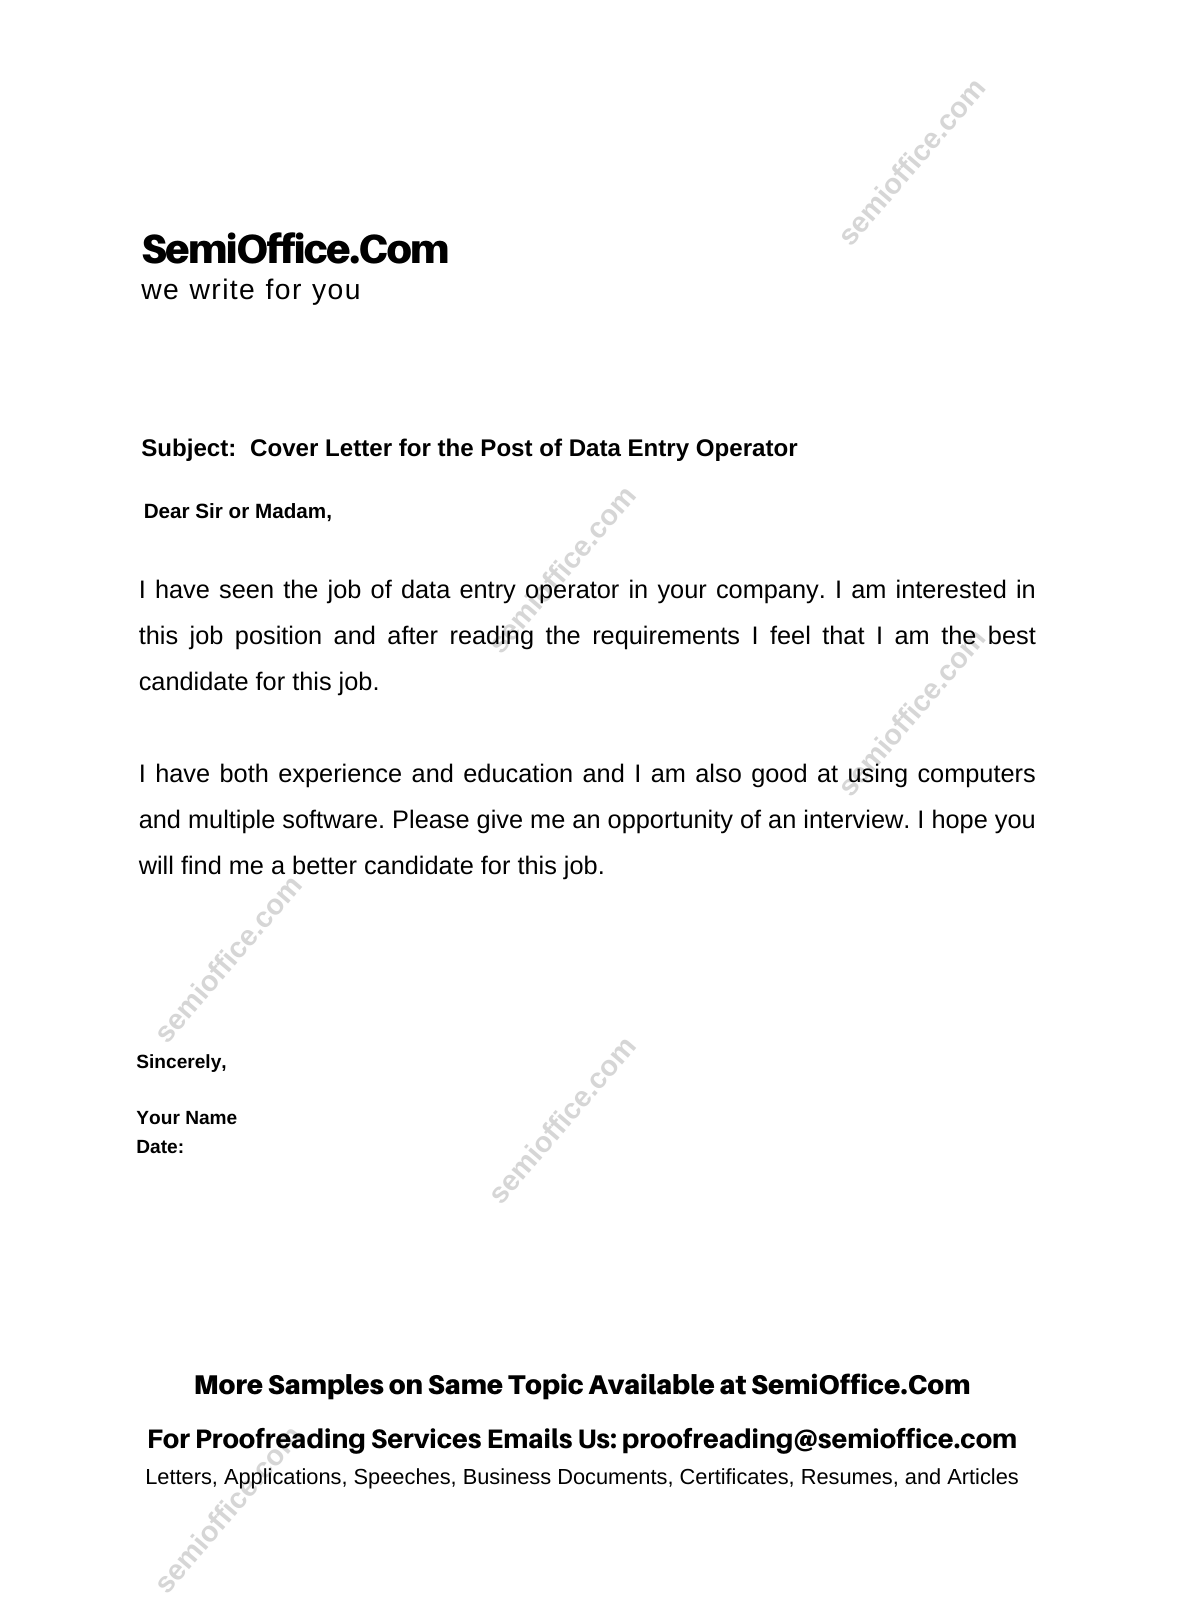 data entry email cover letter